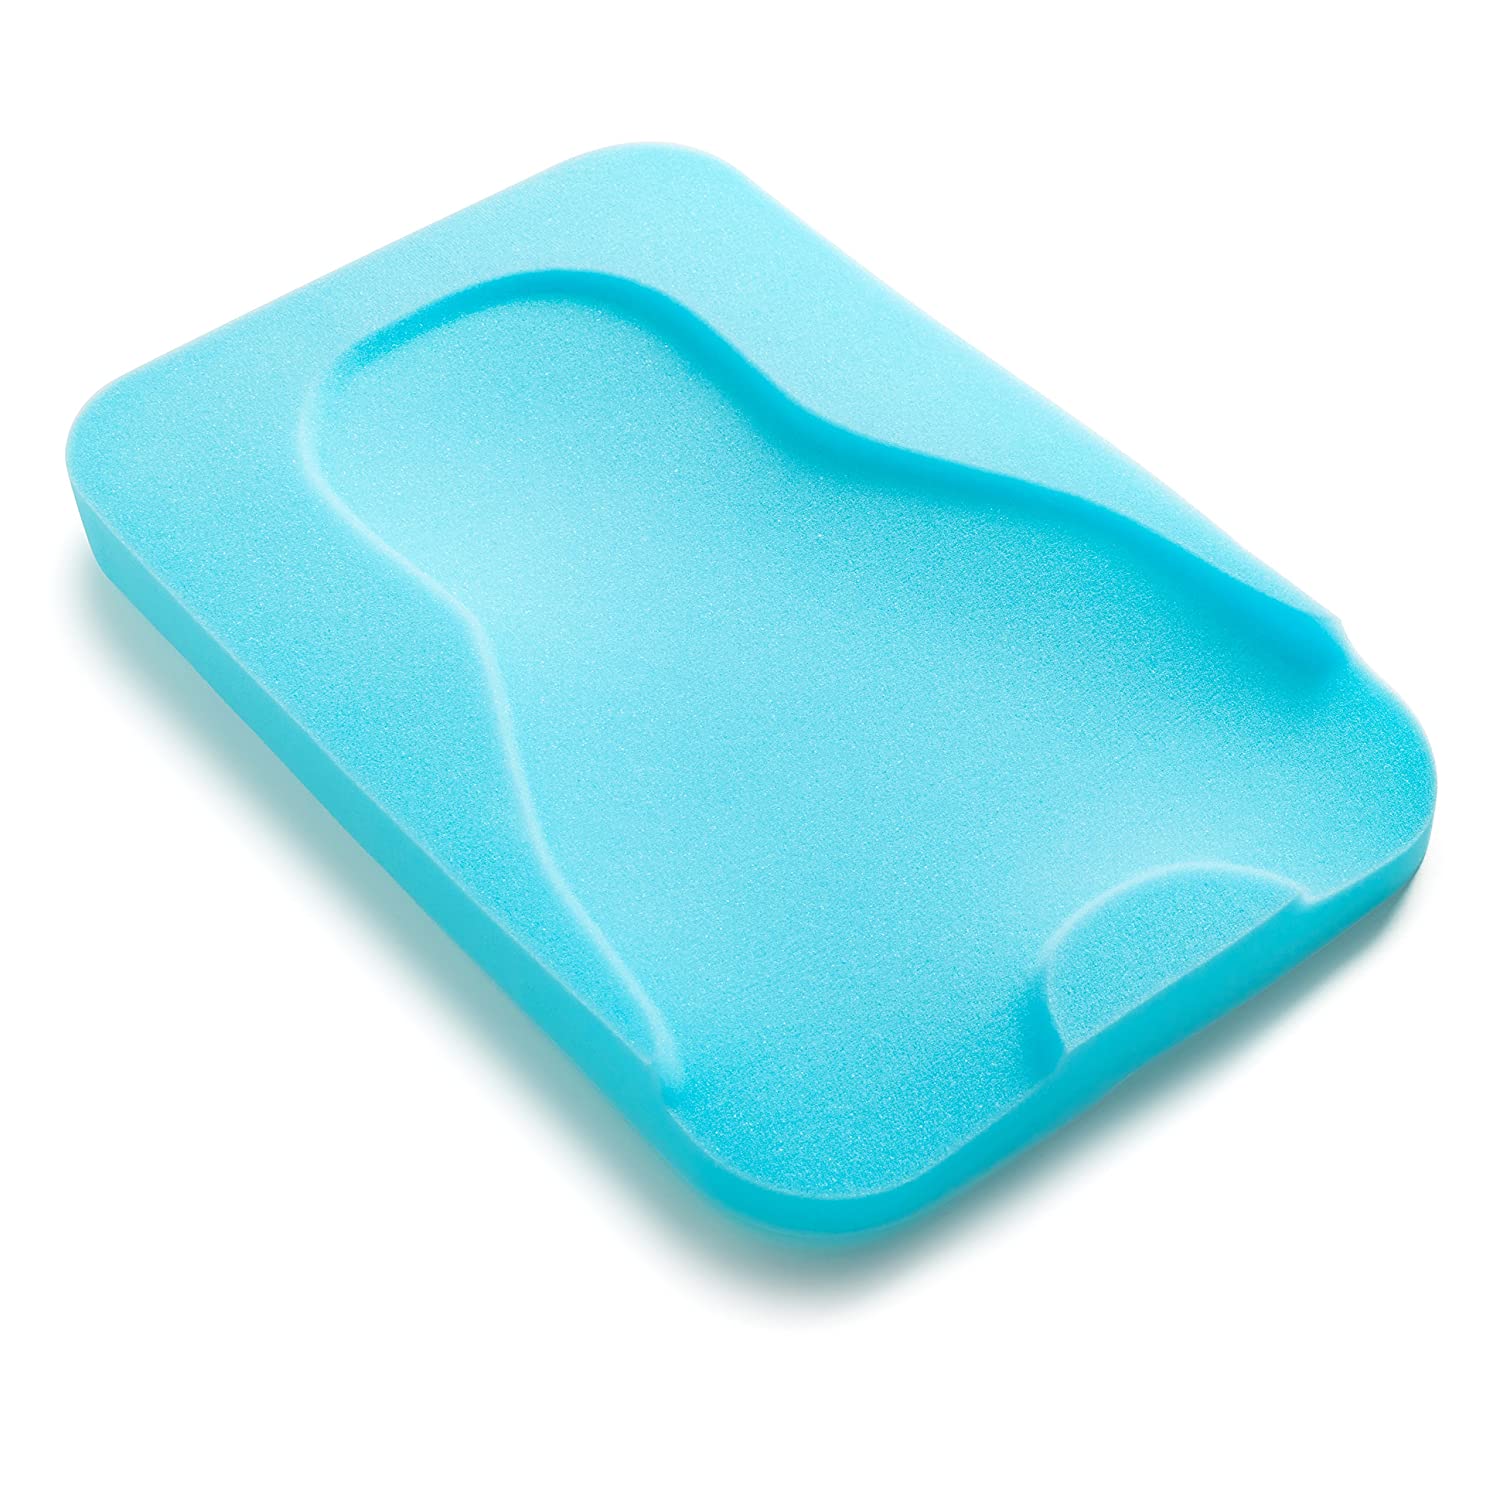 8 Best Baby Bath Sponges 2022 - Buying Guide & Reviews 1